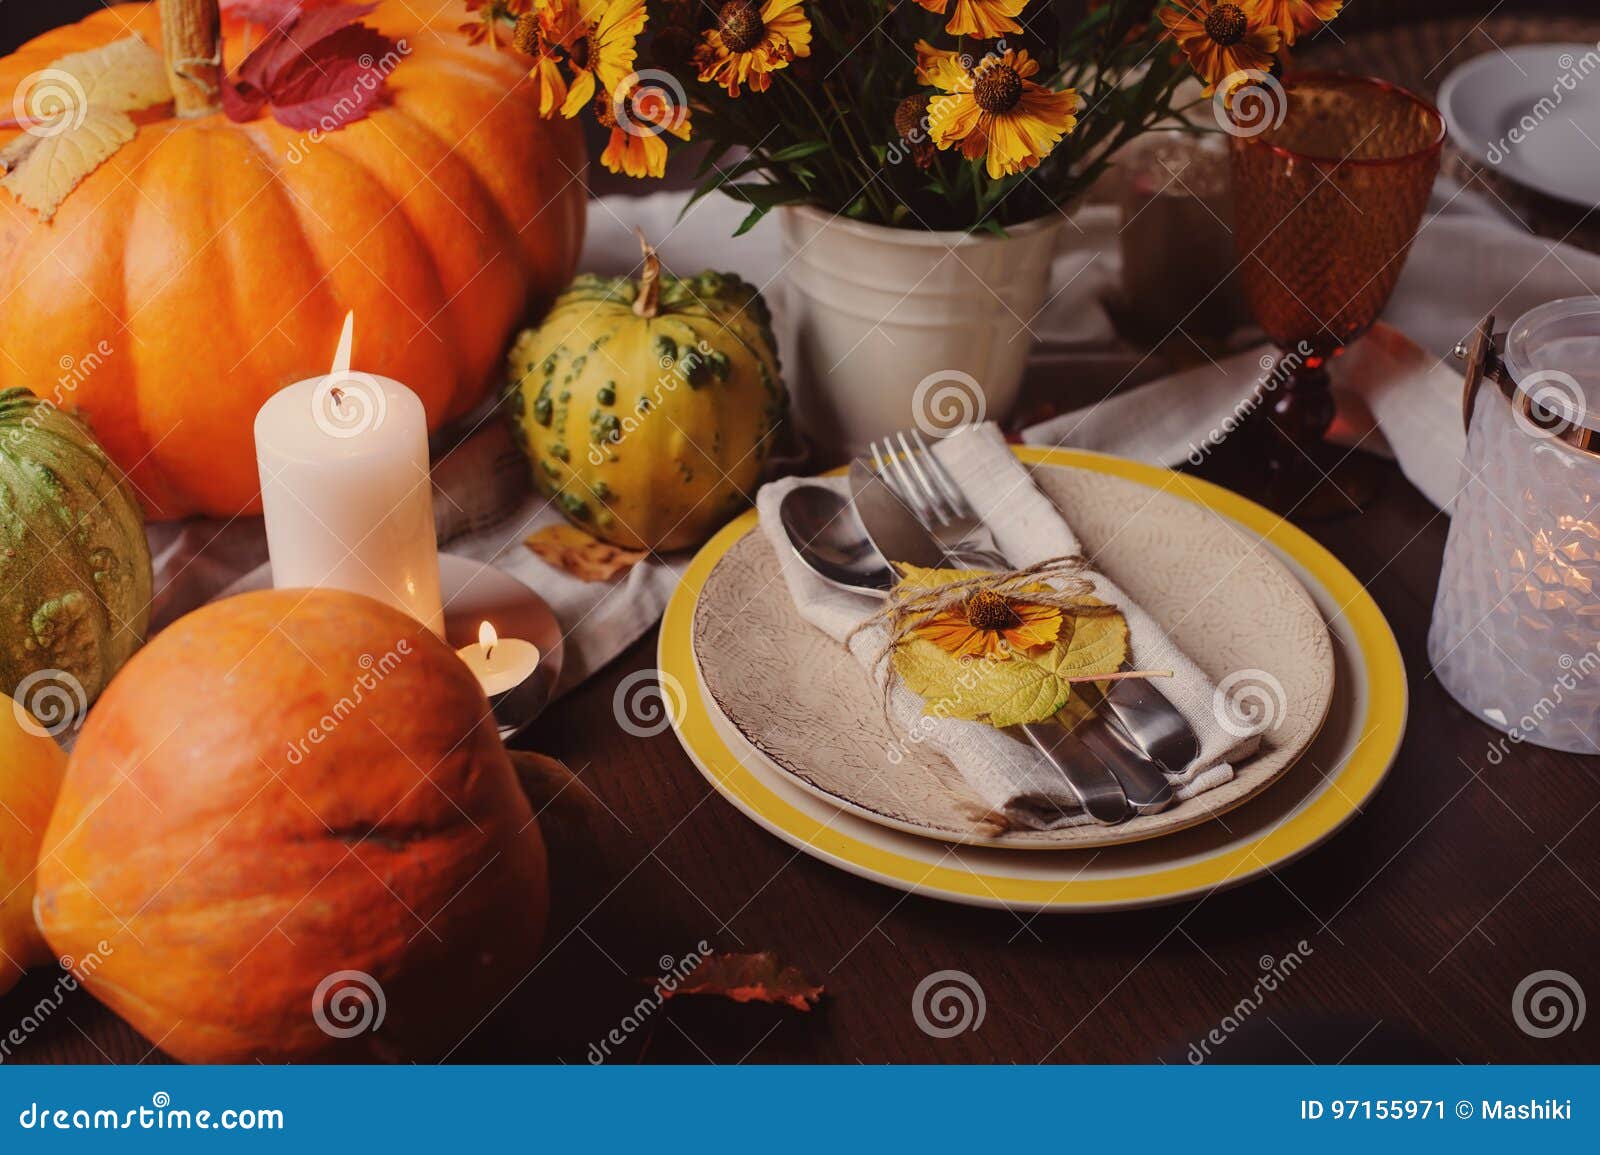 Autumn Traditional Seasonal Table Setting at Home with Pumpkins ...